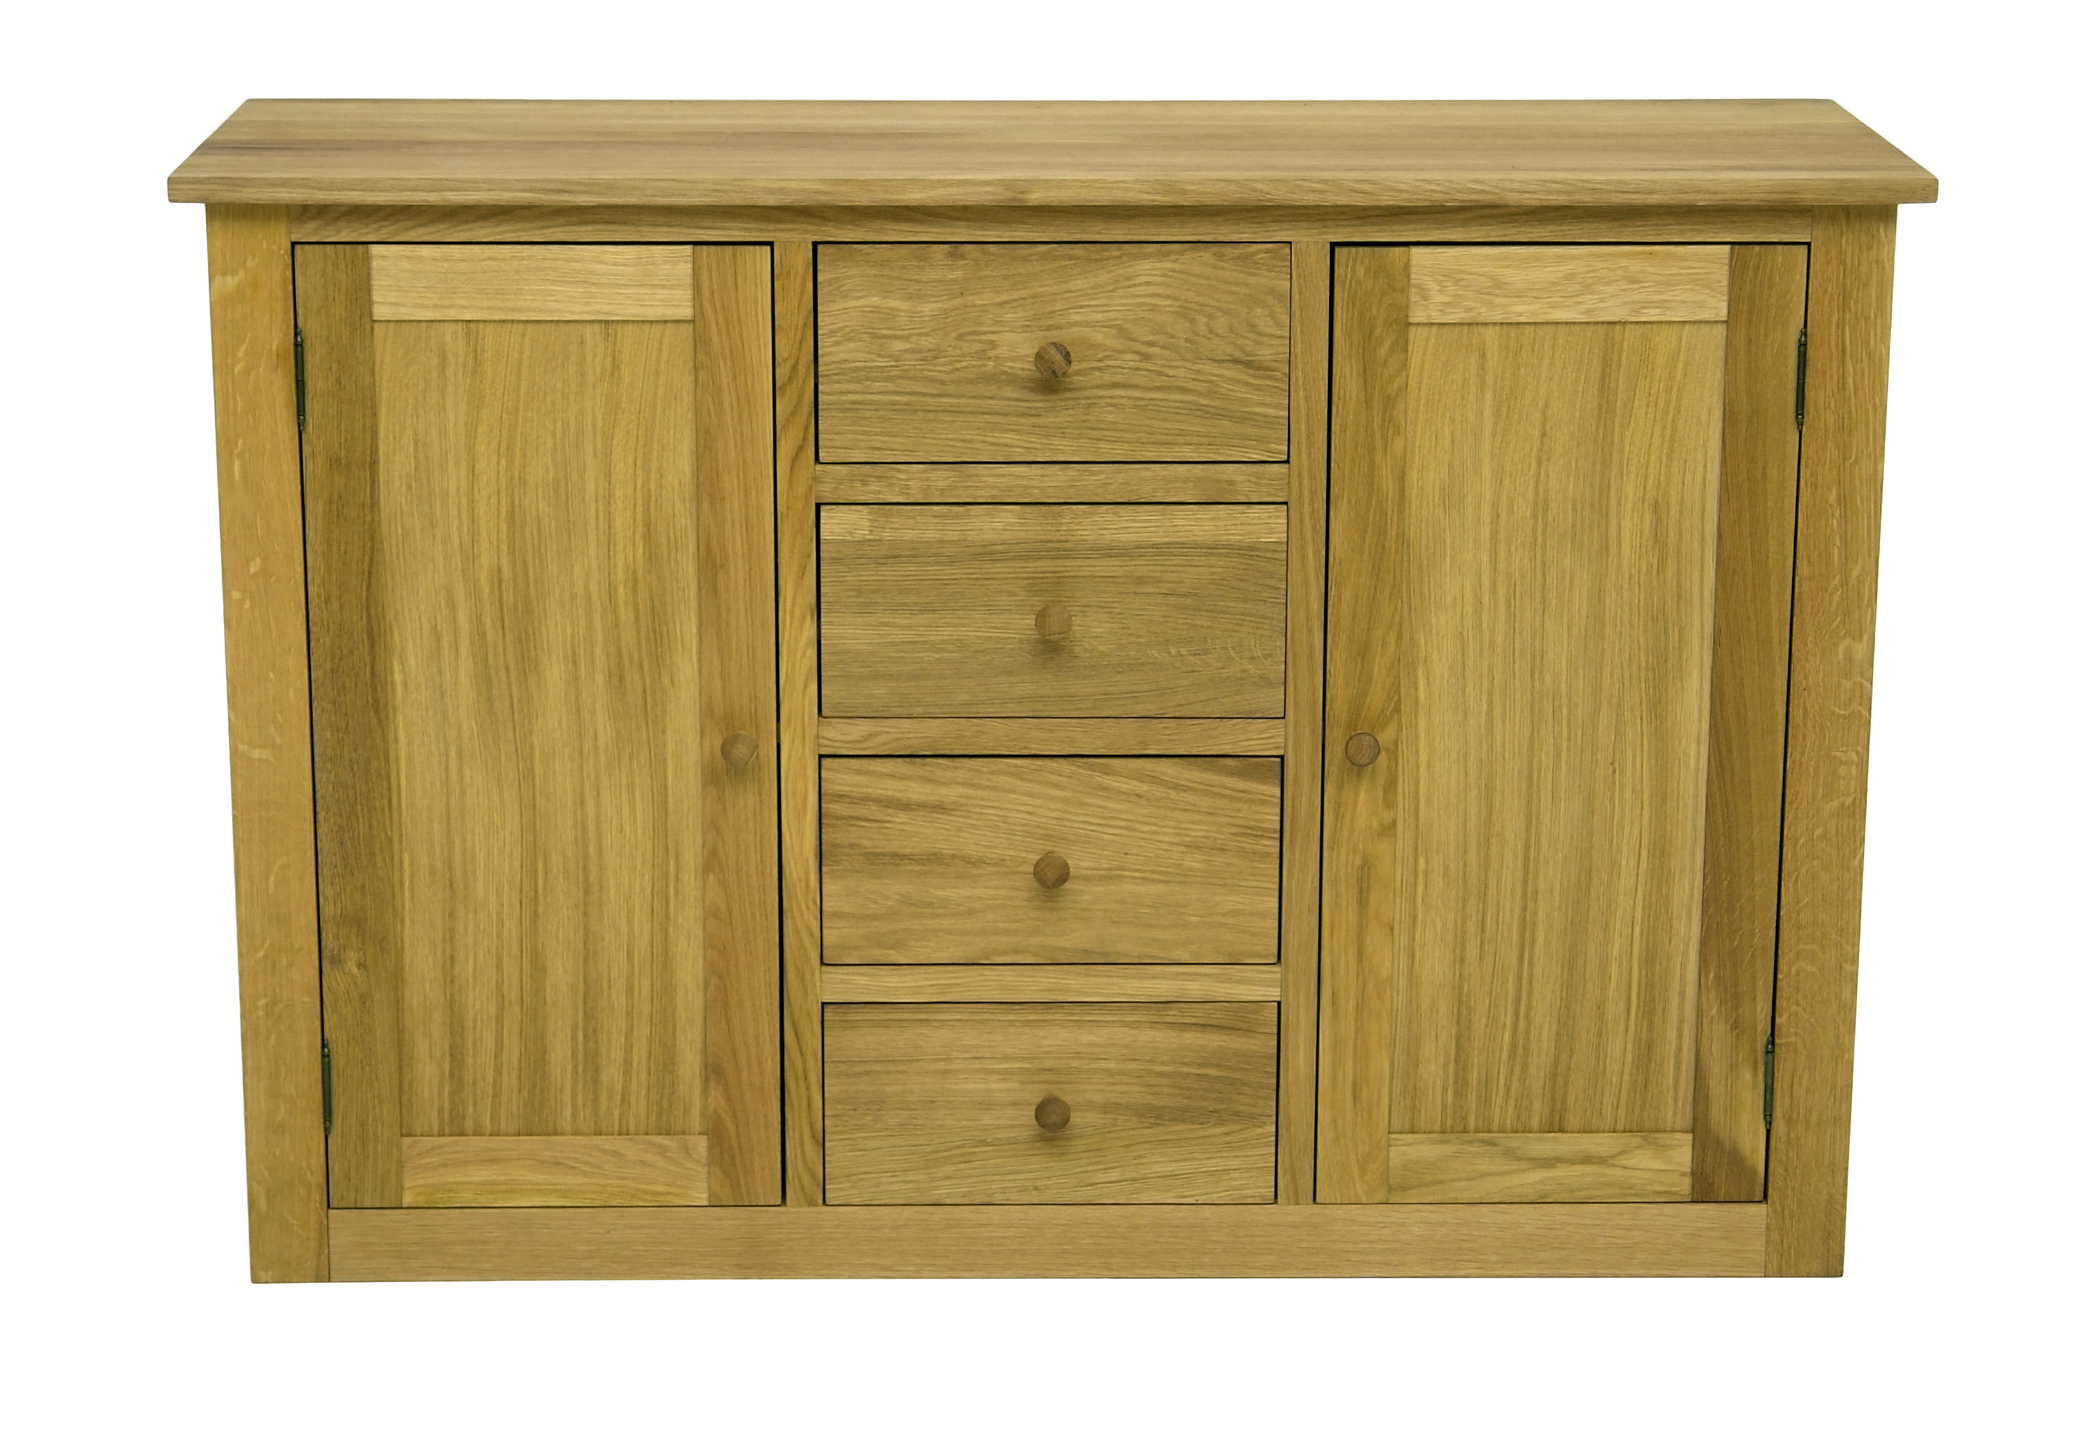 High quality, classic style design with front and upper board made in masive oak or beech wood. Side boards made in veneer